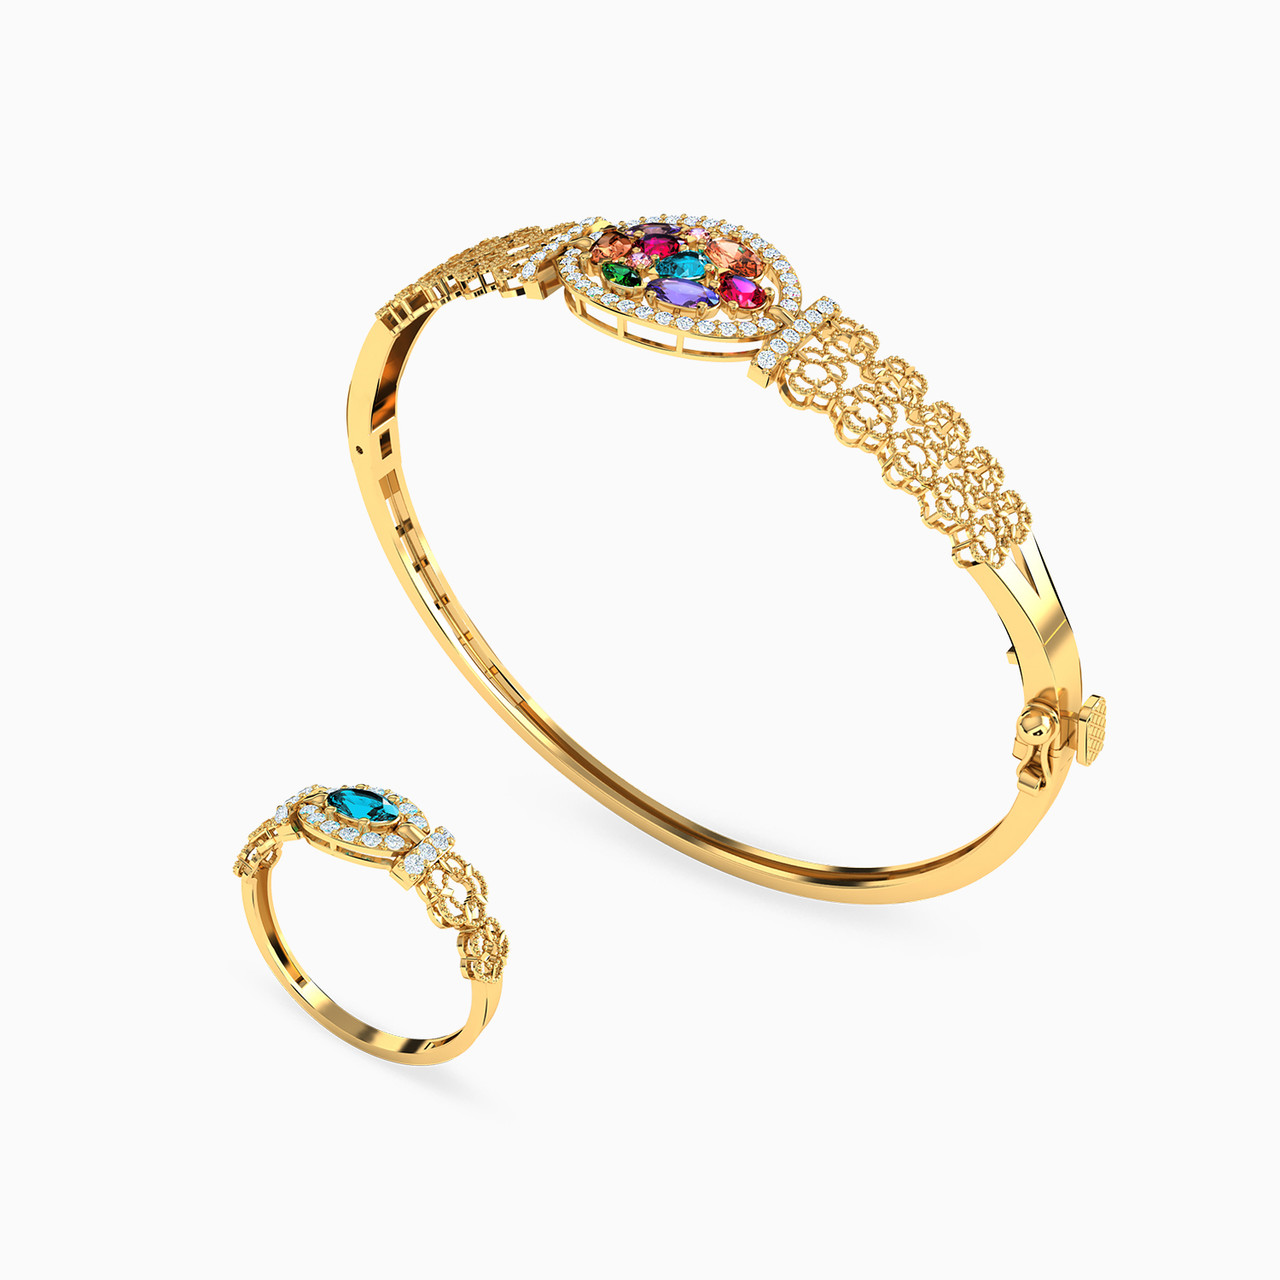 21K Gold Colored Stones Bangle & Ring Jewelry Set -2 Pieces